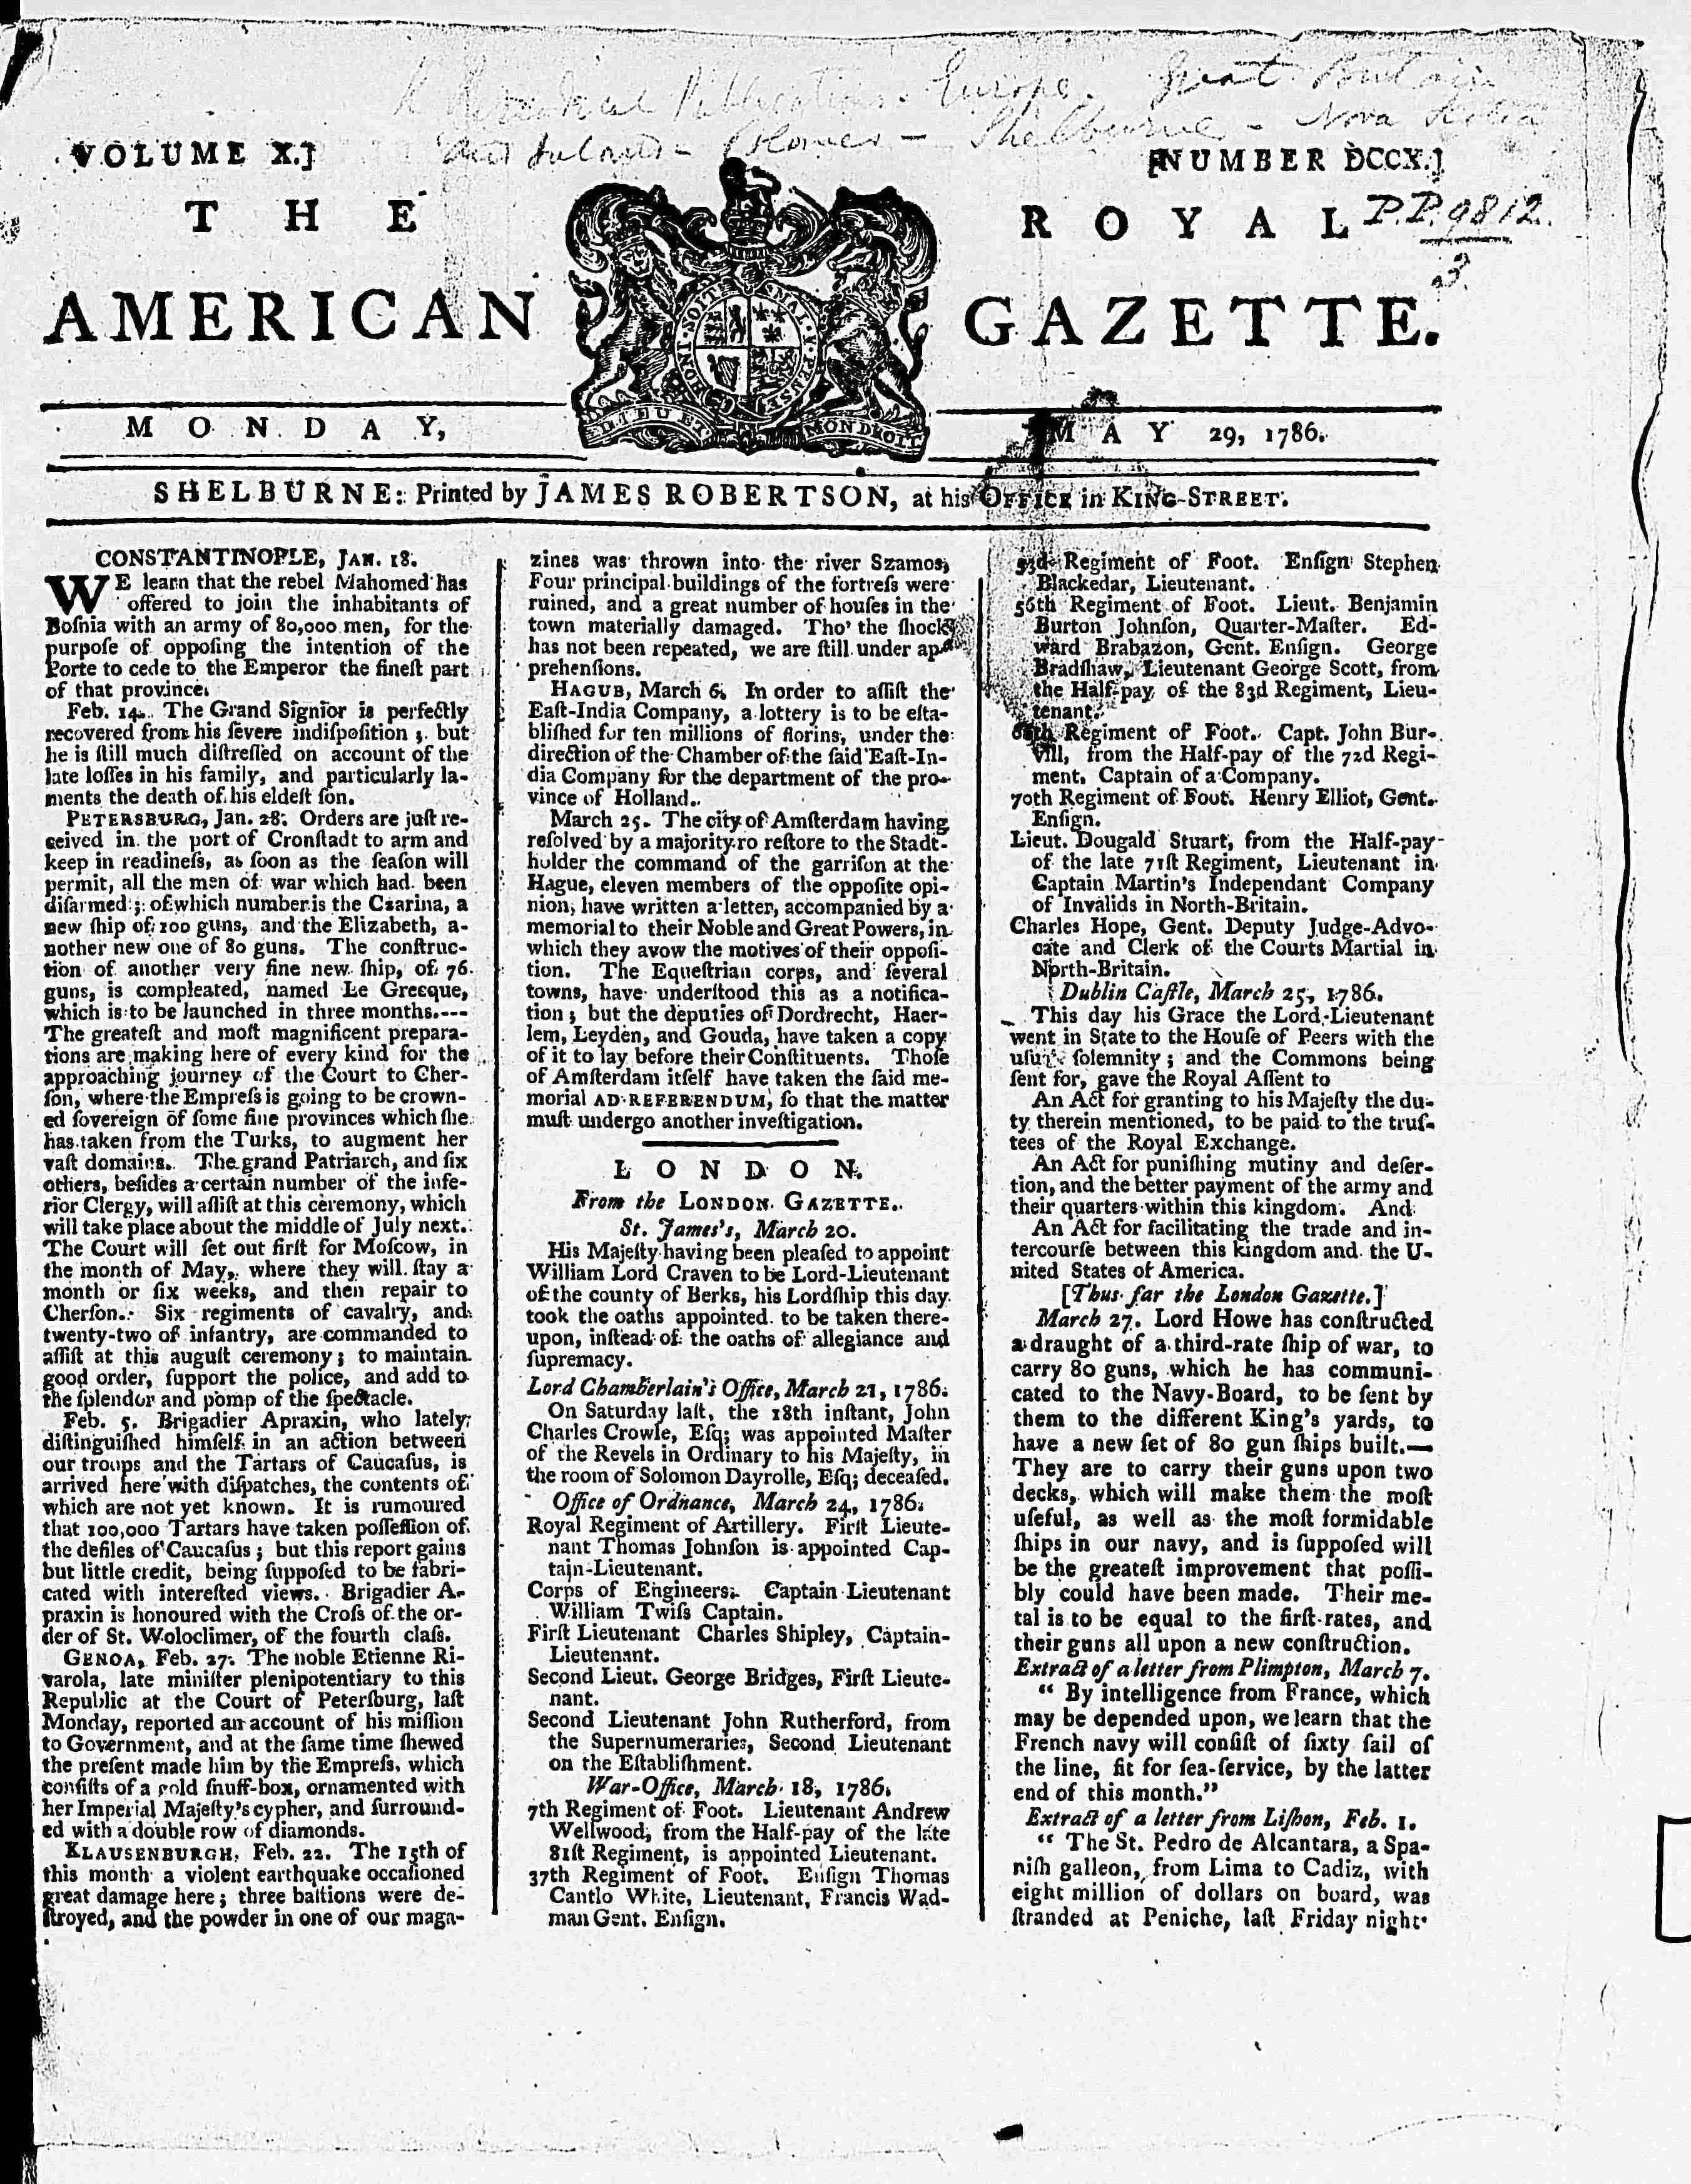 The Royal American Gazette © The British Library